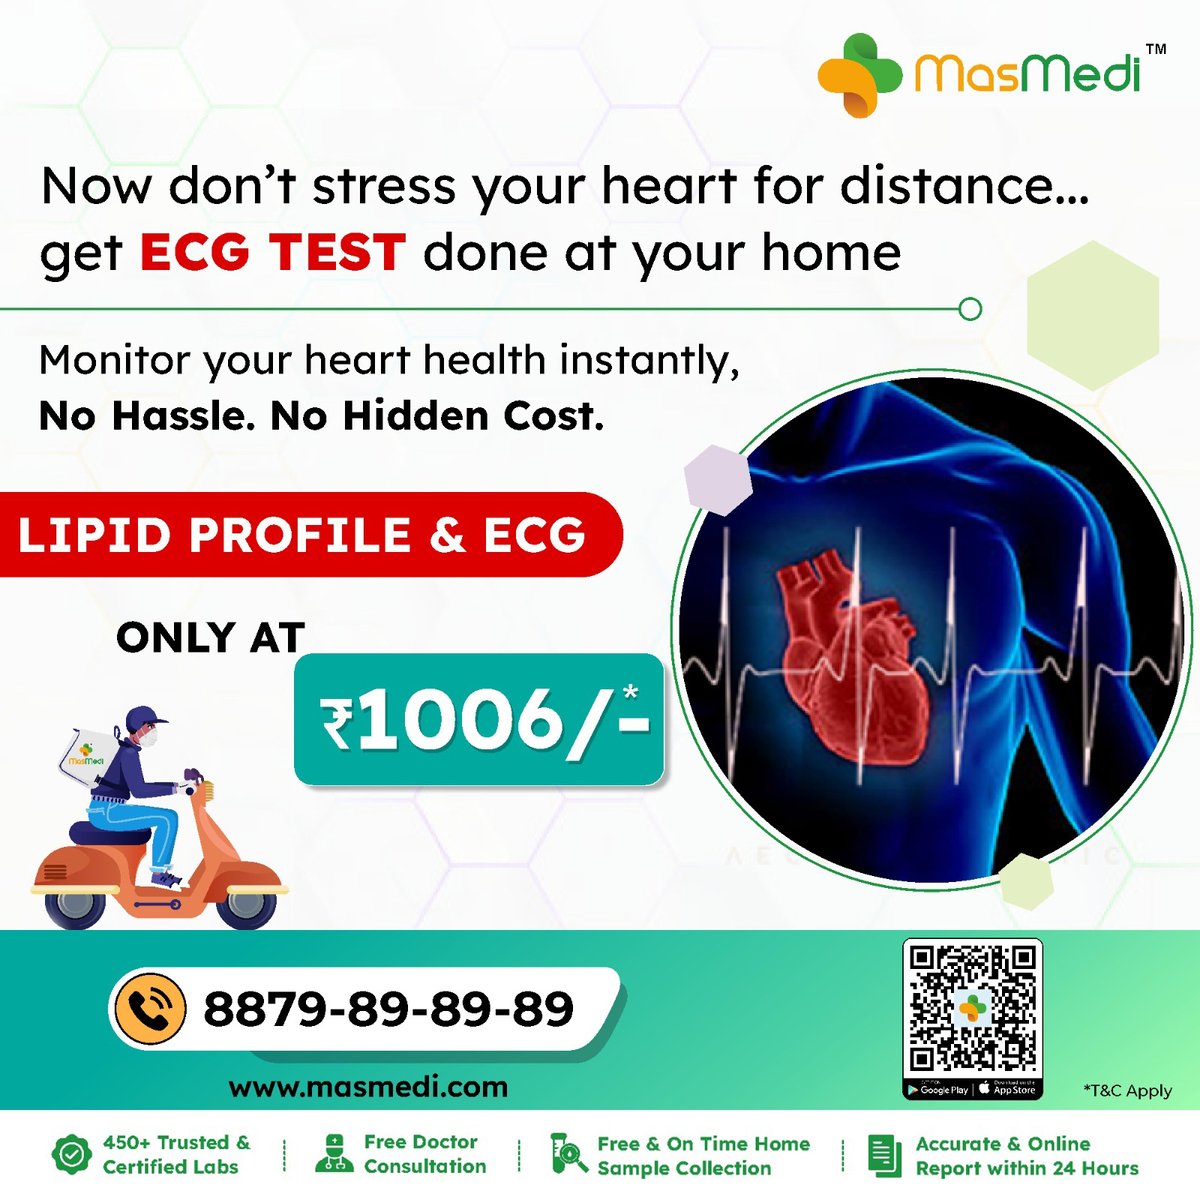 Don't stress over any health check-up tests! Kyunki...
MasMedi hai na....

Now get ECG test done at home. Select the test from trusted & certified lab near you. And stay worry-free.

#ECG #ECGtest #ECGathome #HealthCheckUps #MasMedi #Mumbai #WeCare 
Edited · 4m